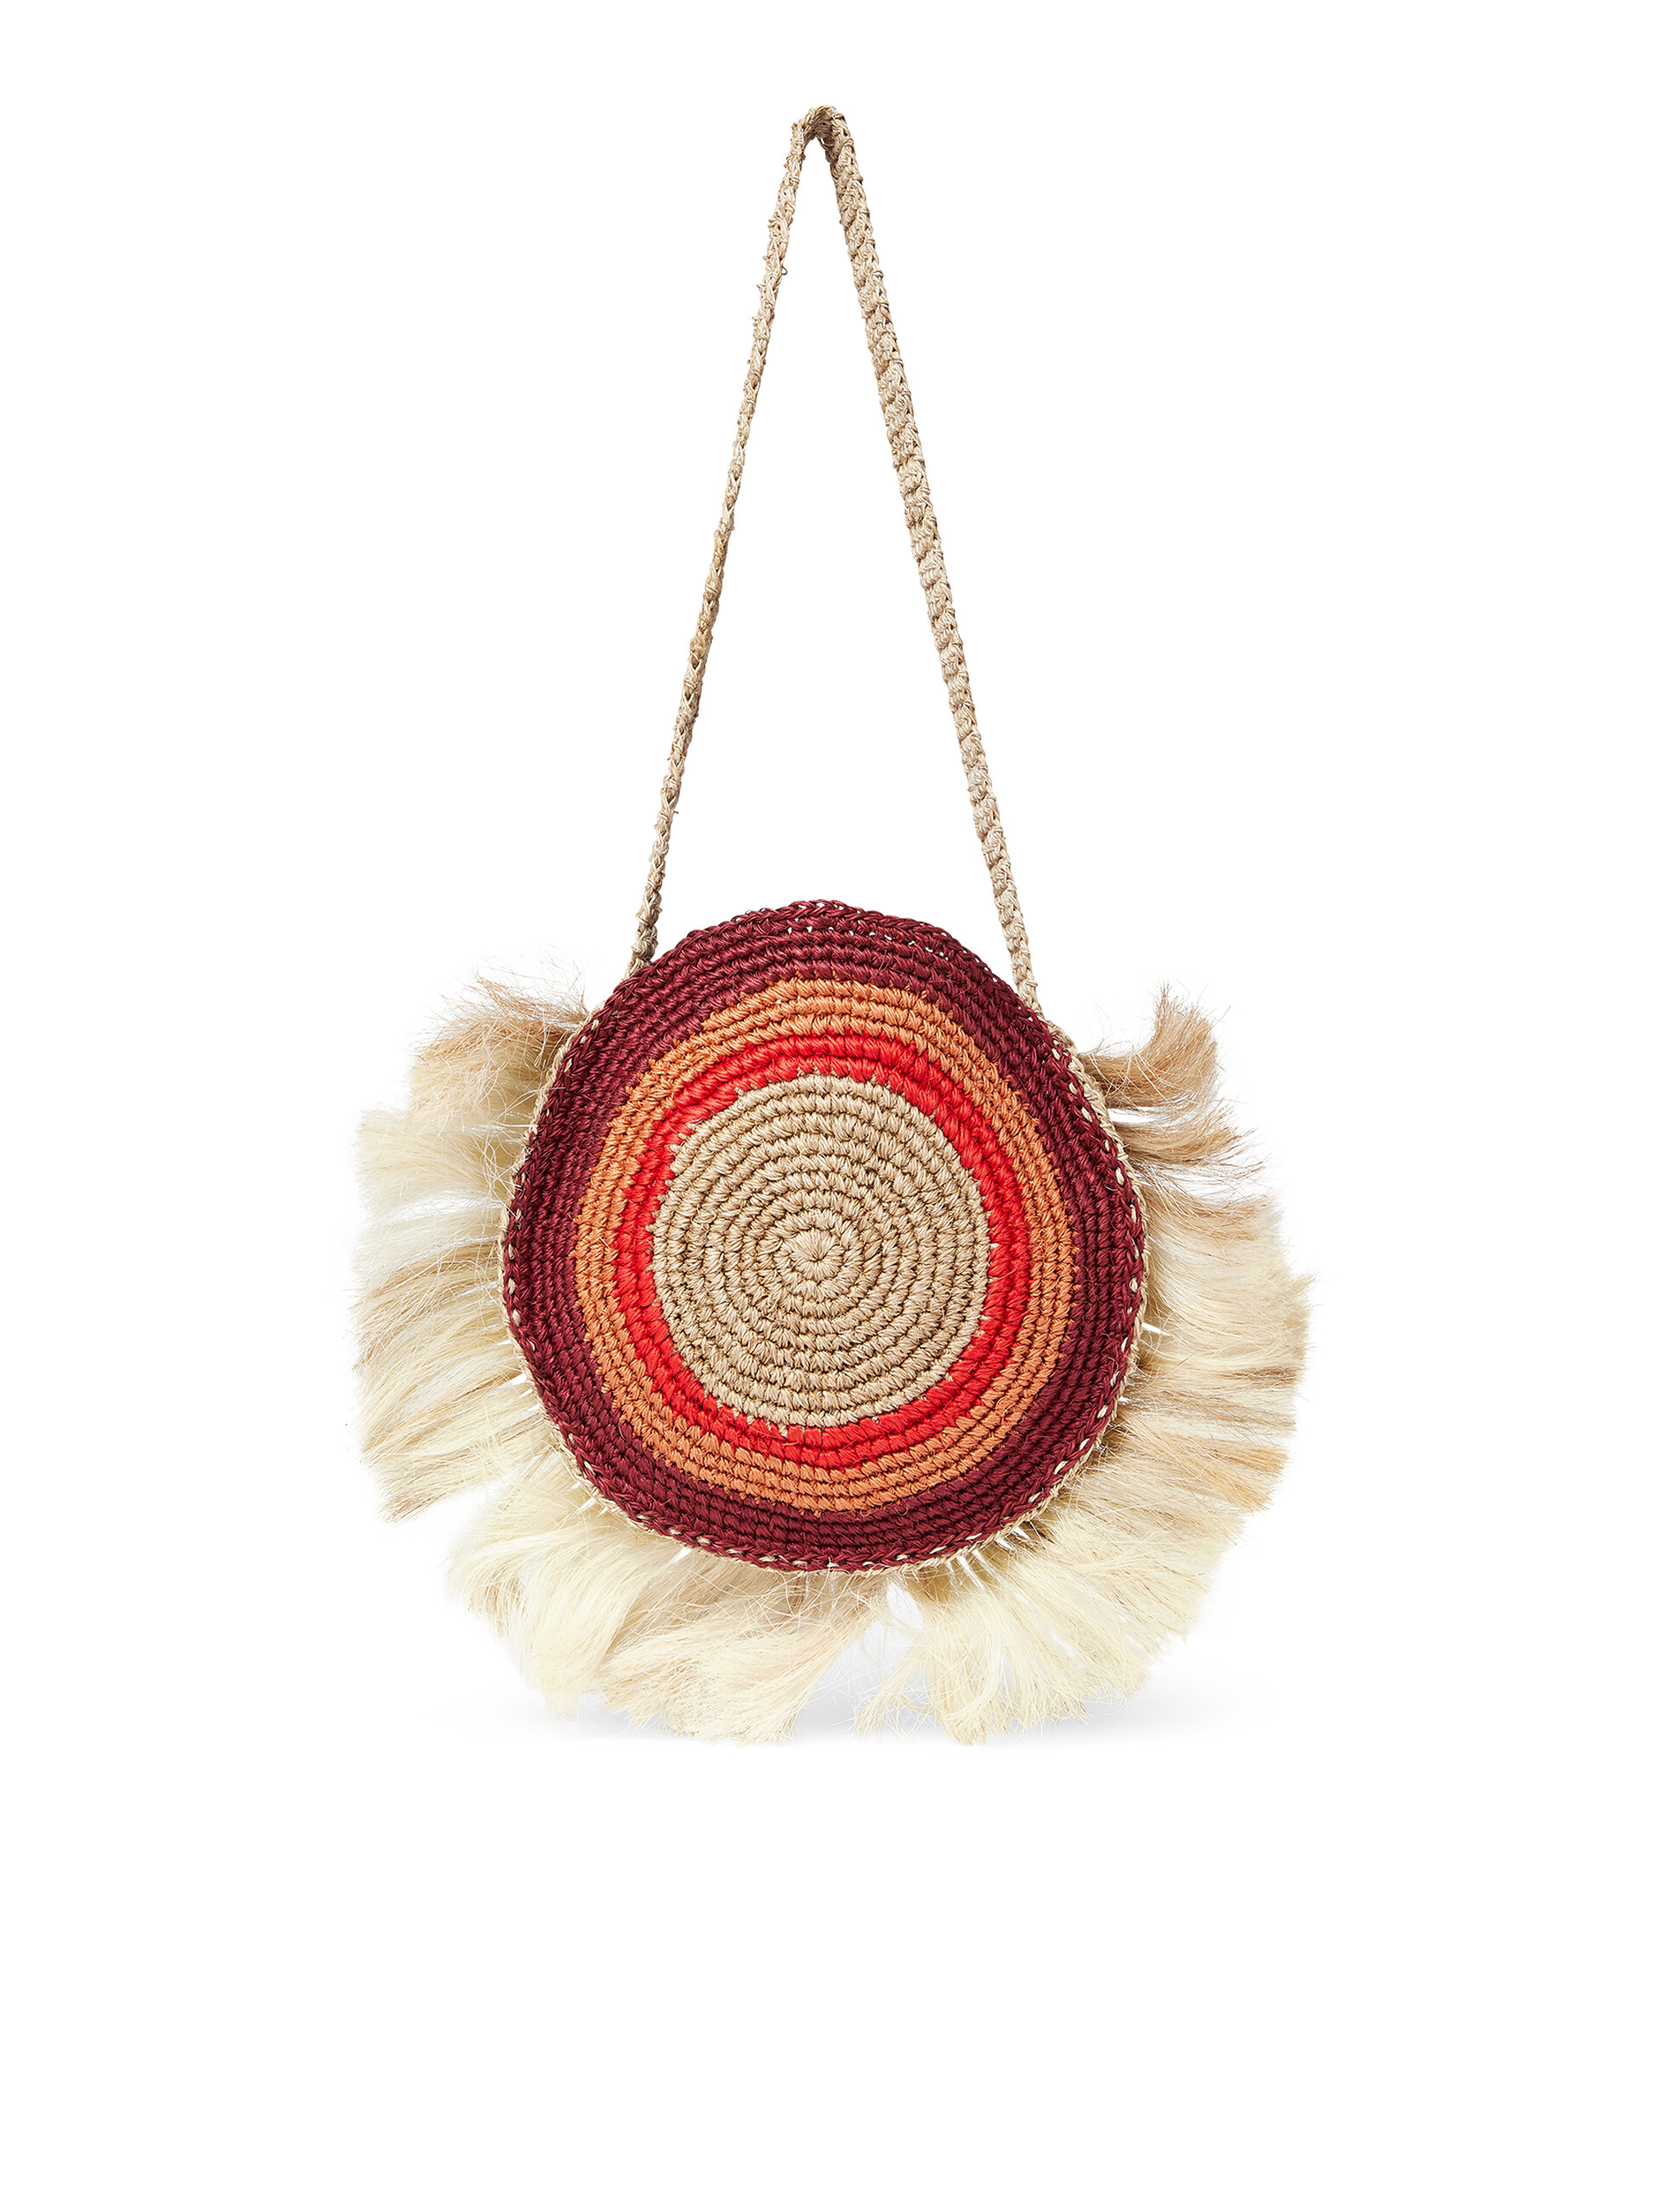 MARNI MARKET cross-body bag in natural fibre with fringes - Bags - Image 3